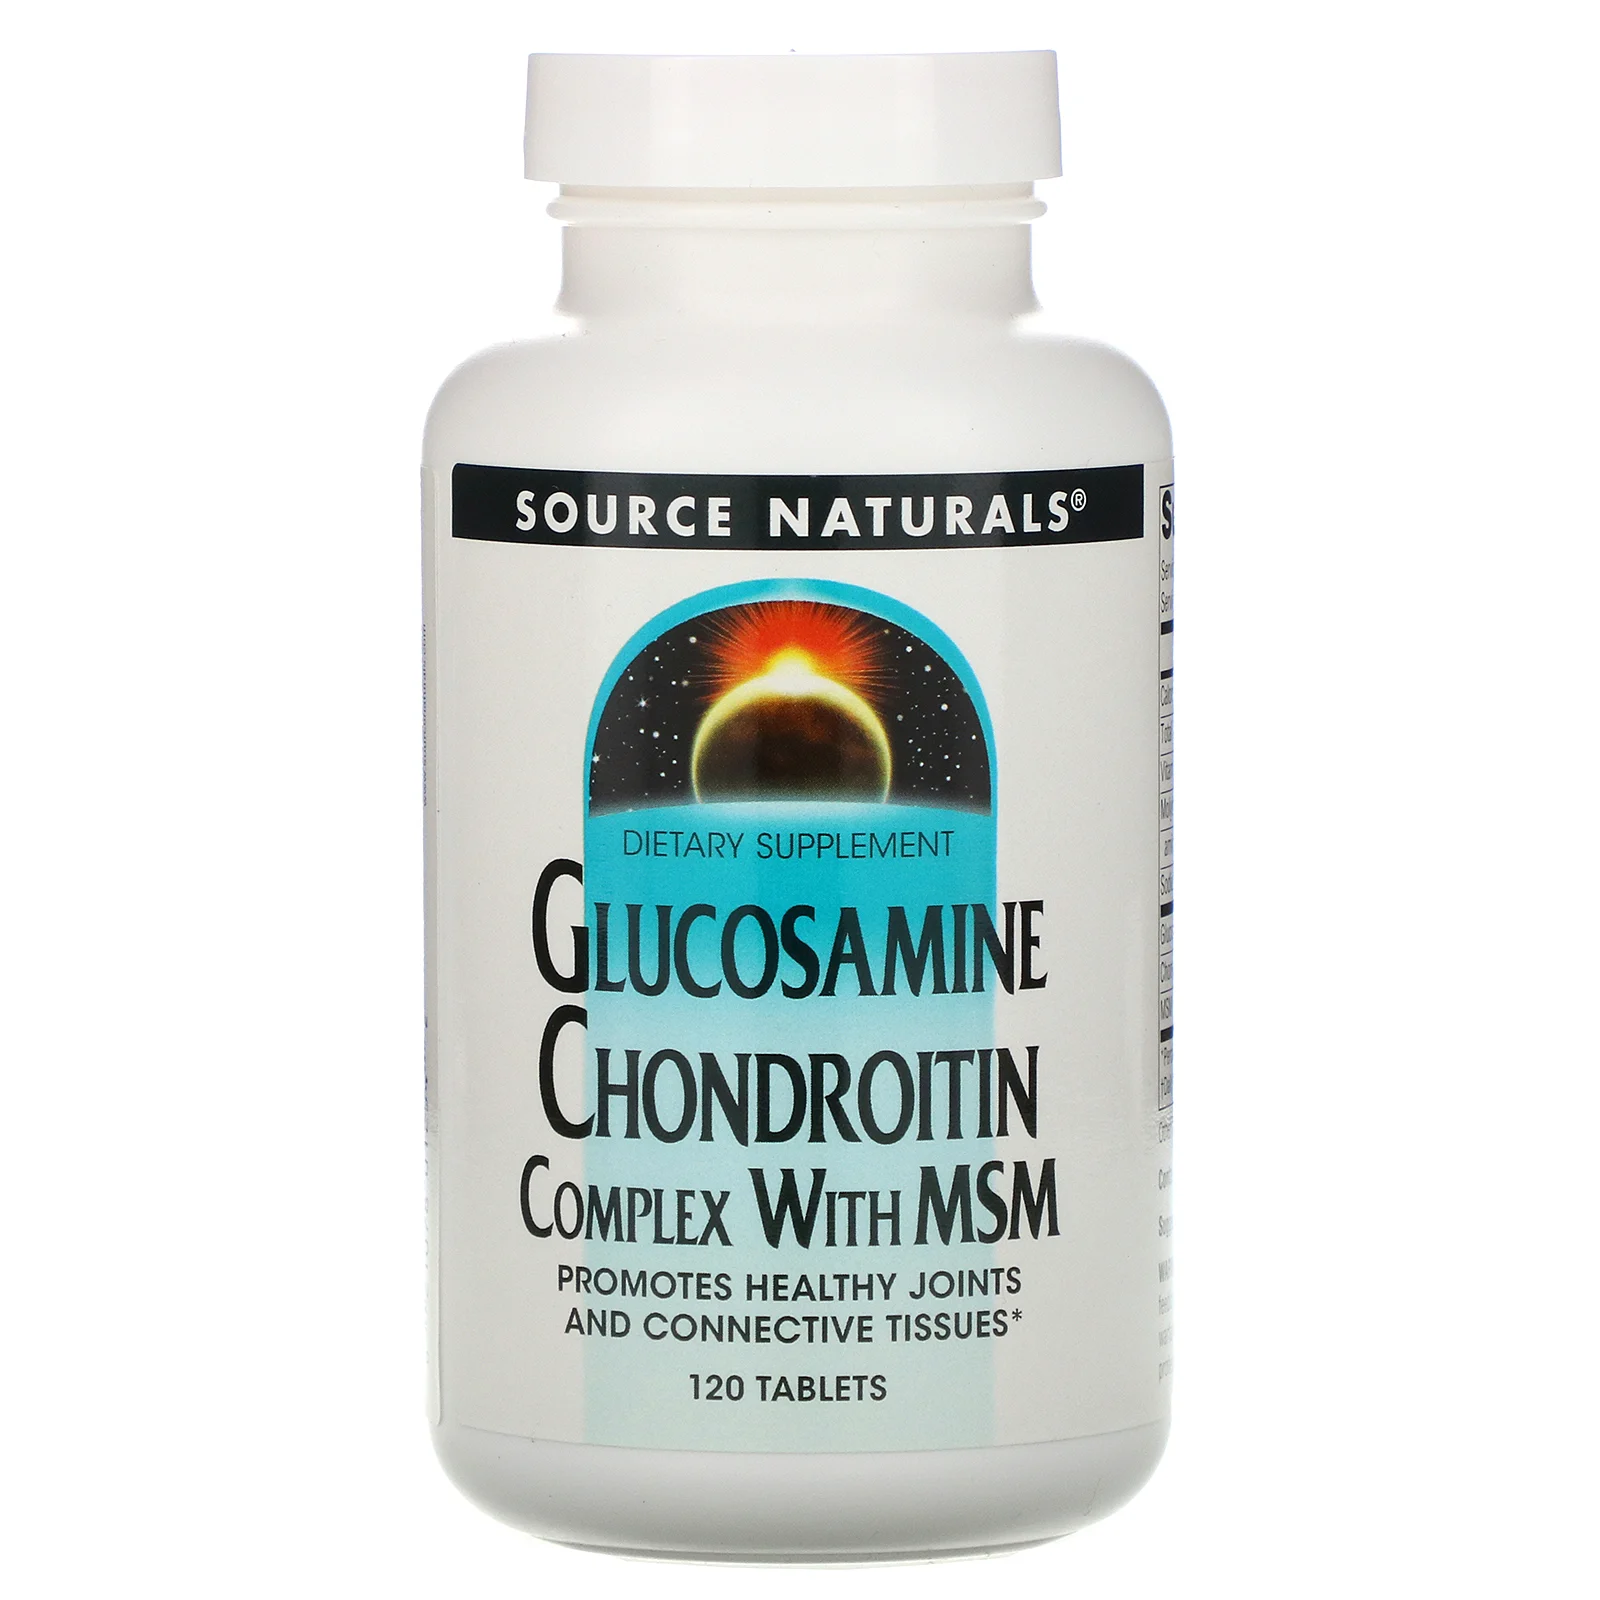 Source naturals, dietary supplement, glucosamine chondroitin, complex with MSM, 120 tablets